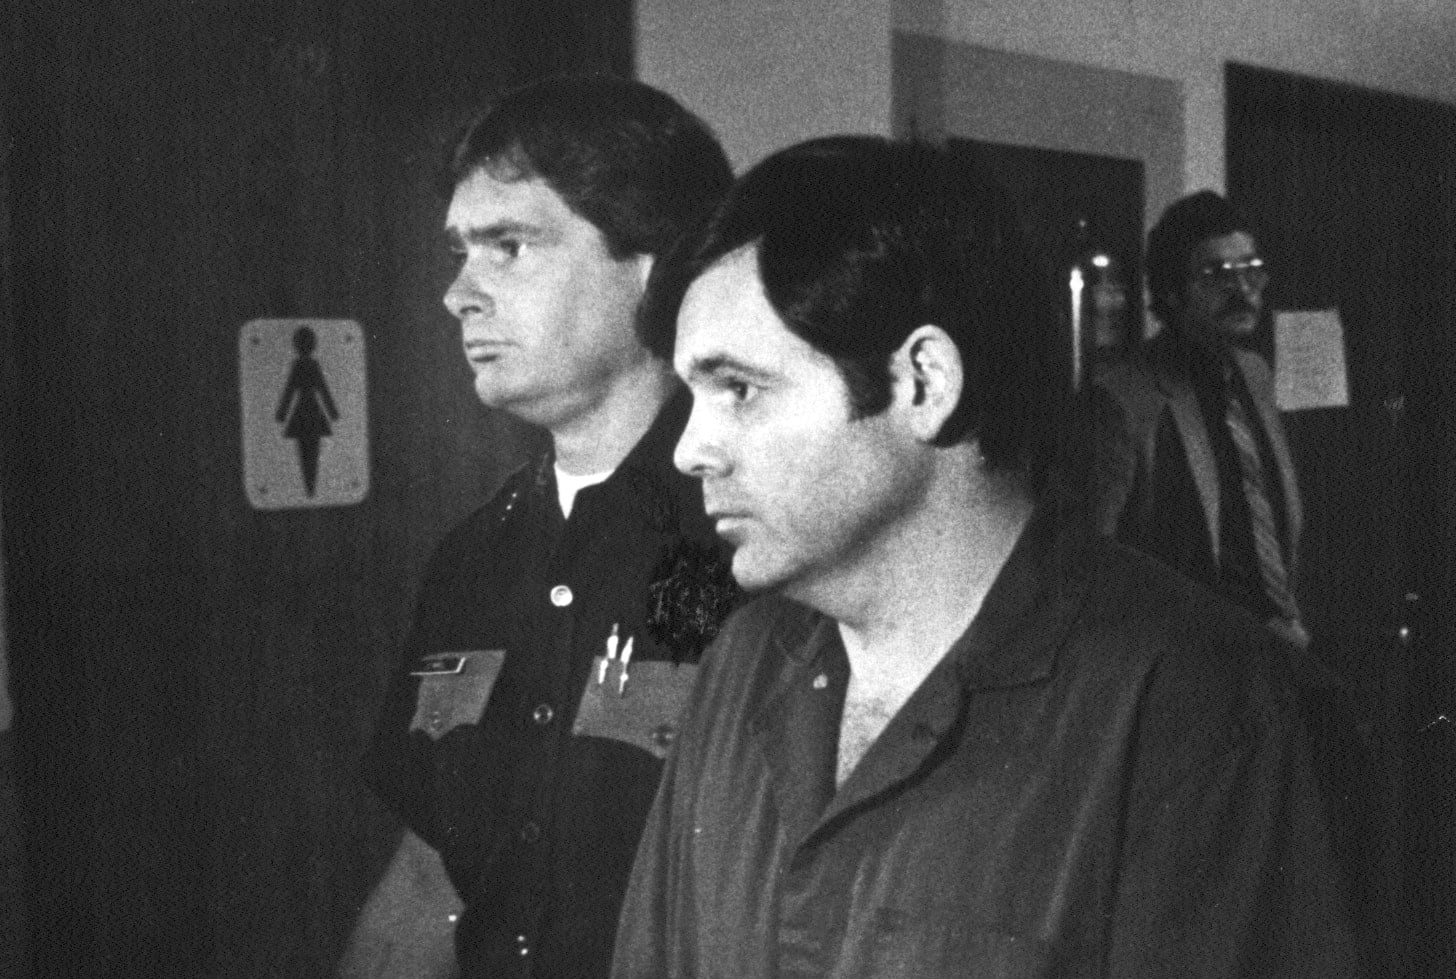 David Jay Sterling. Sterling is the convicted "Hazel Dell Rapist" who received five life sentences after terrorizing the Clark County community in summer 1982.